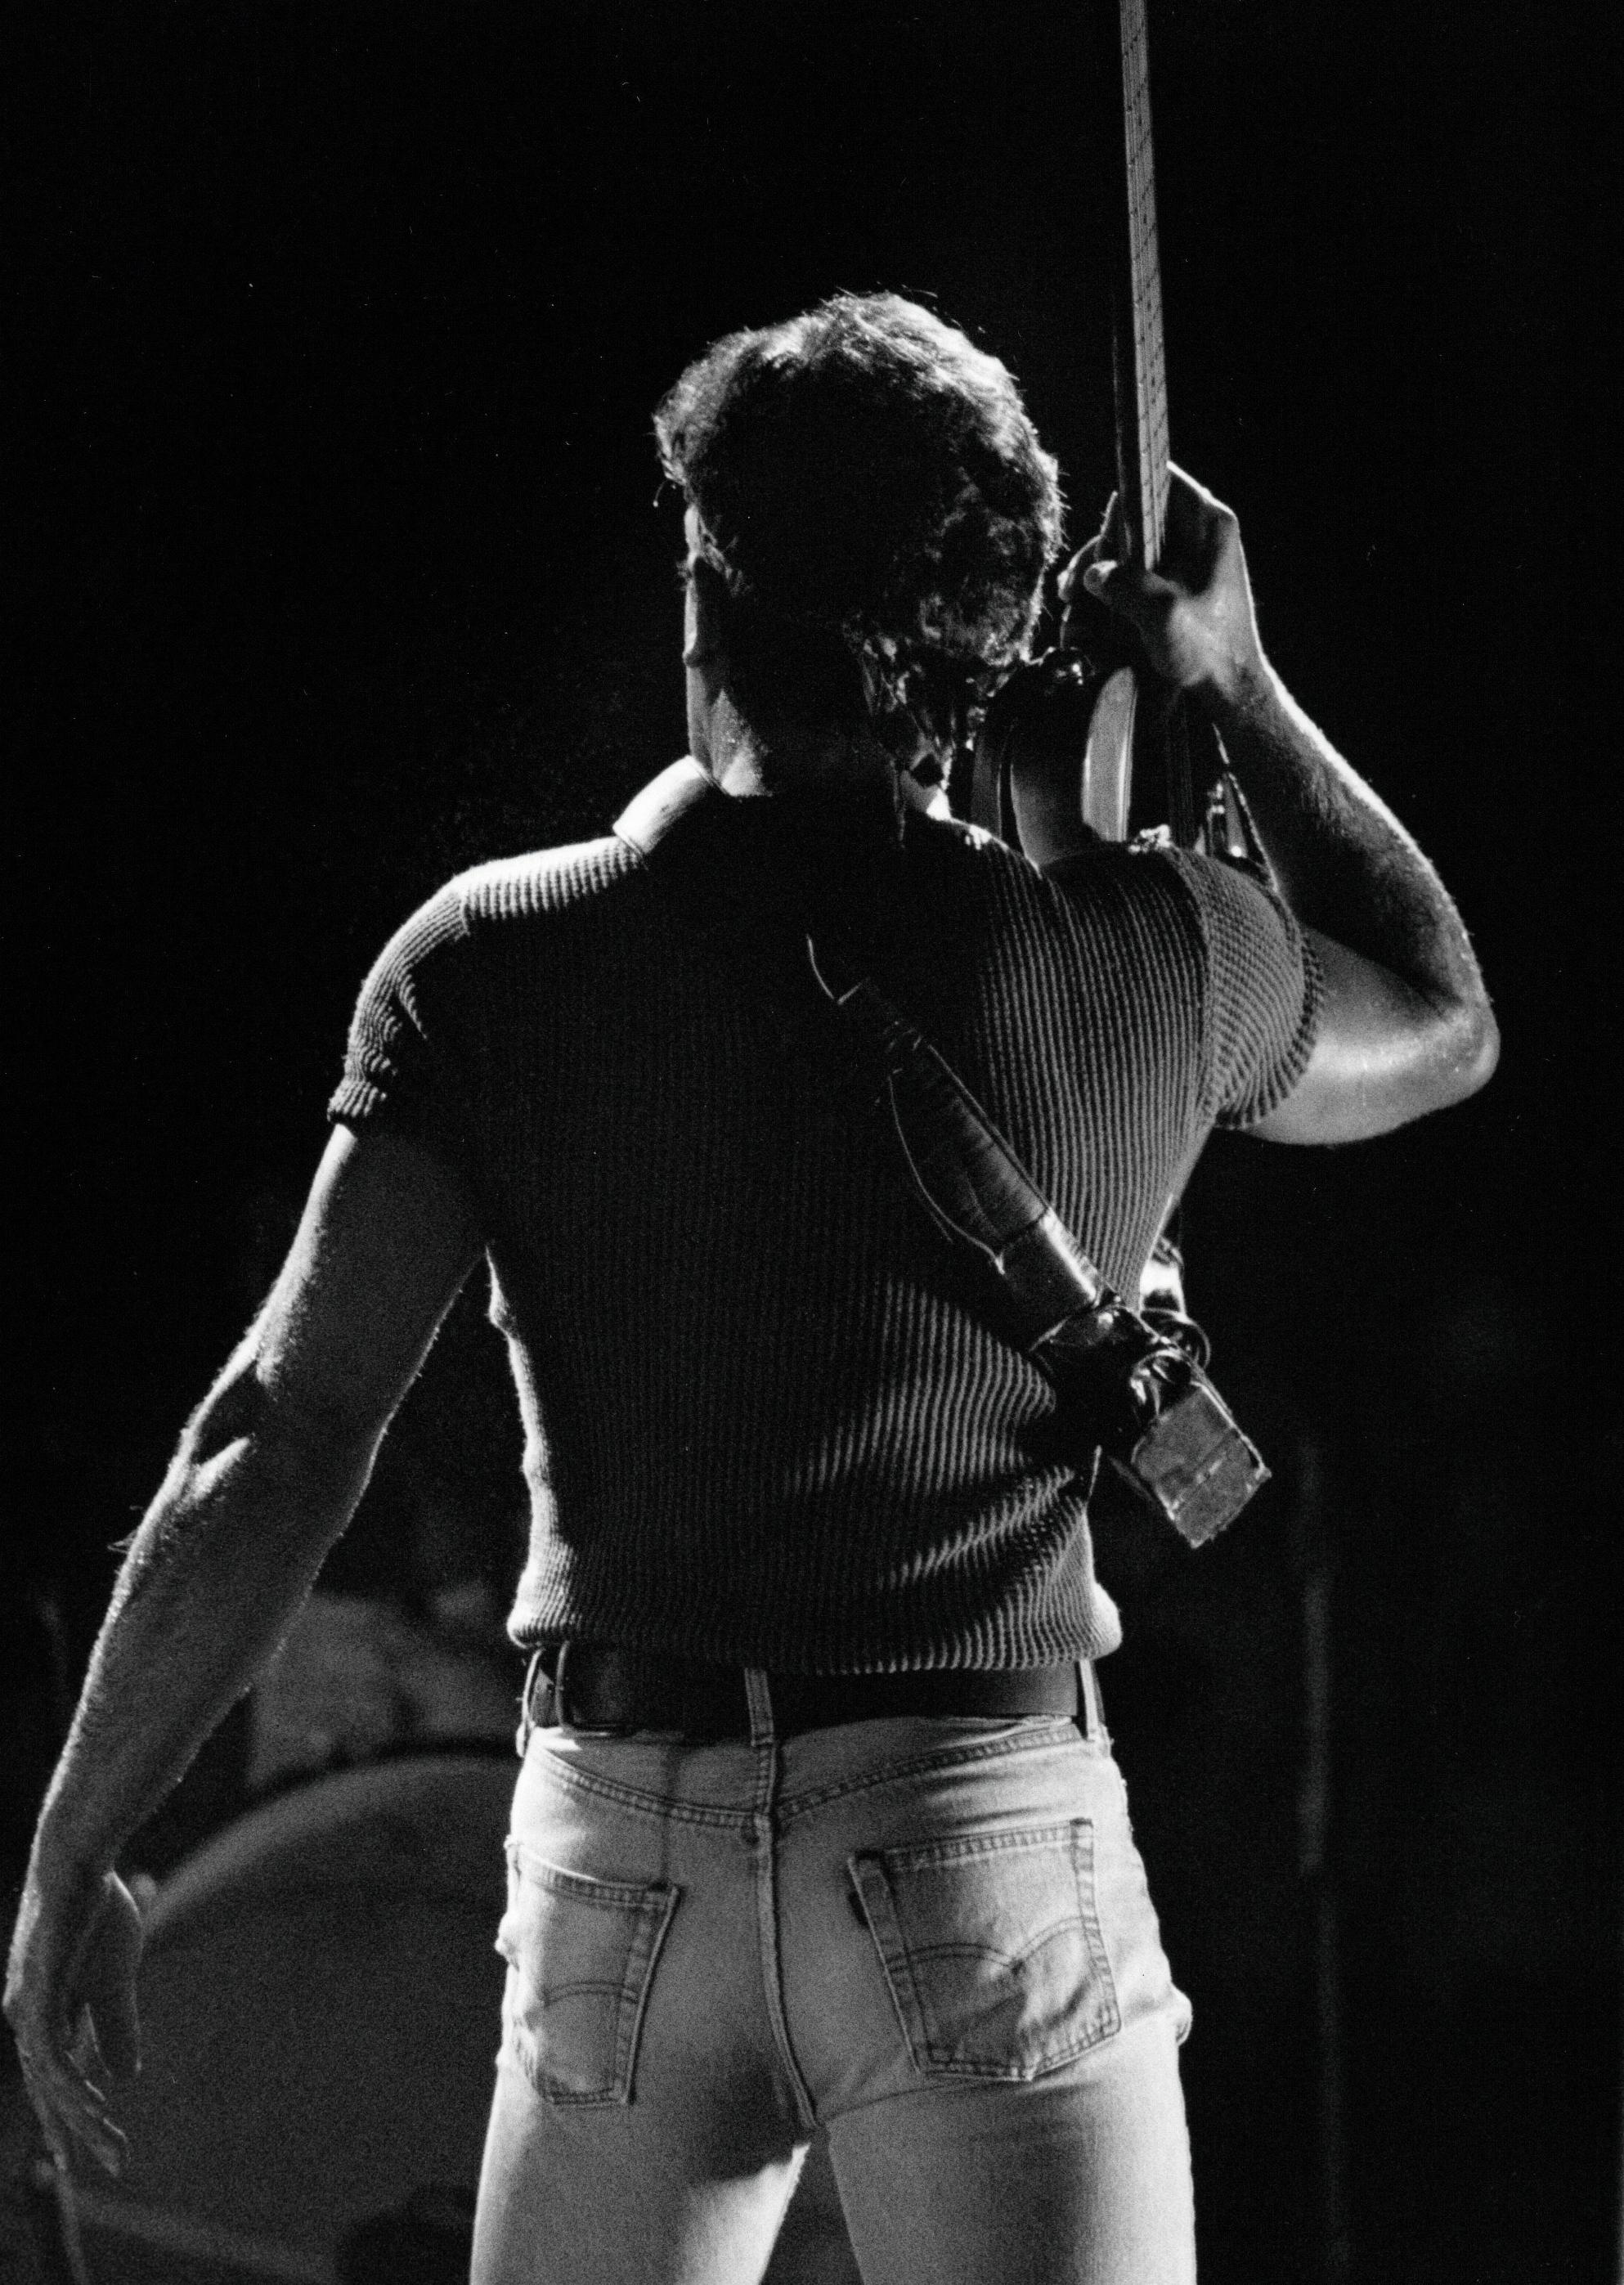 Rocky Widner Black and White Photograph - Bruce Springsteen Silhouette on Stage Vintage Original Photograph